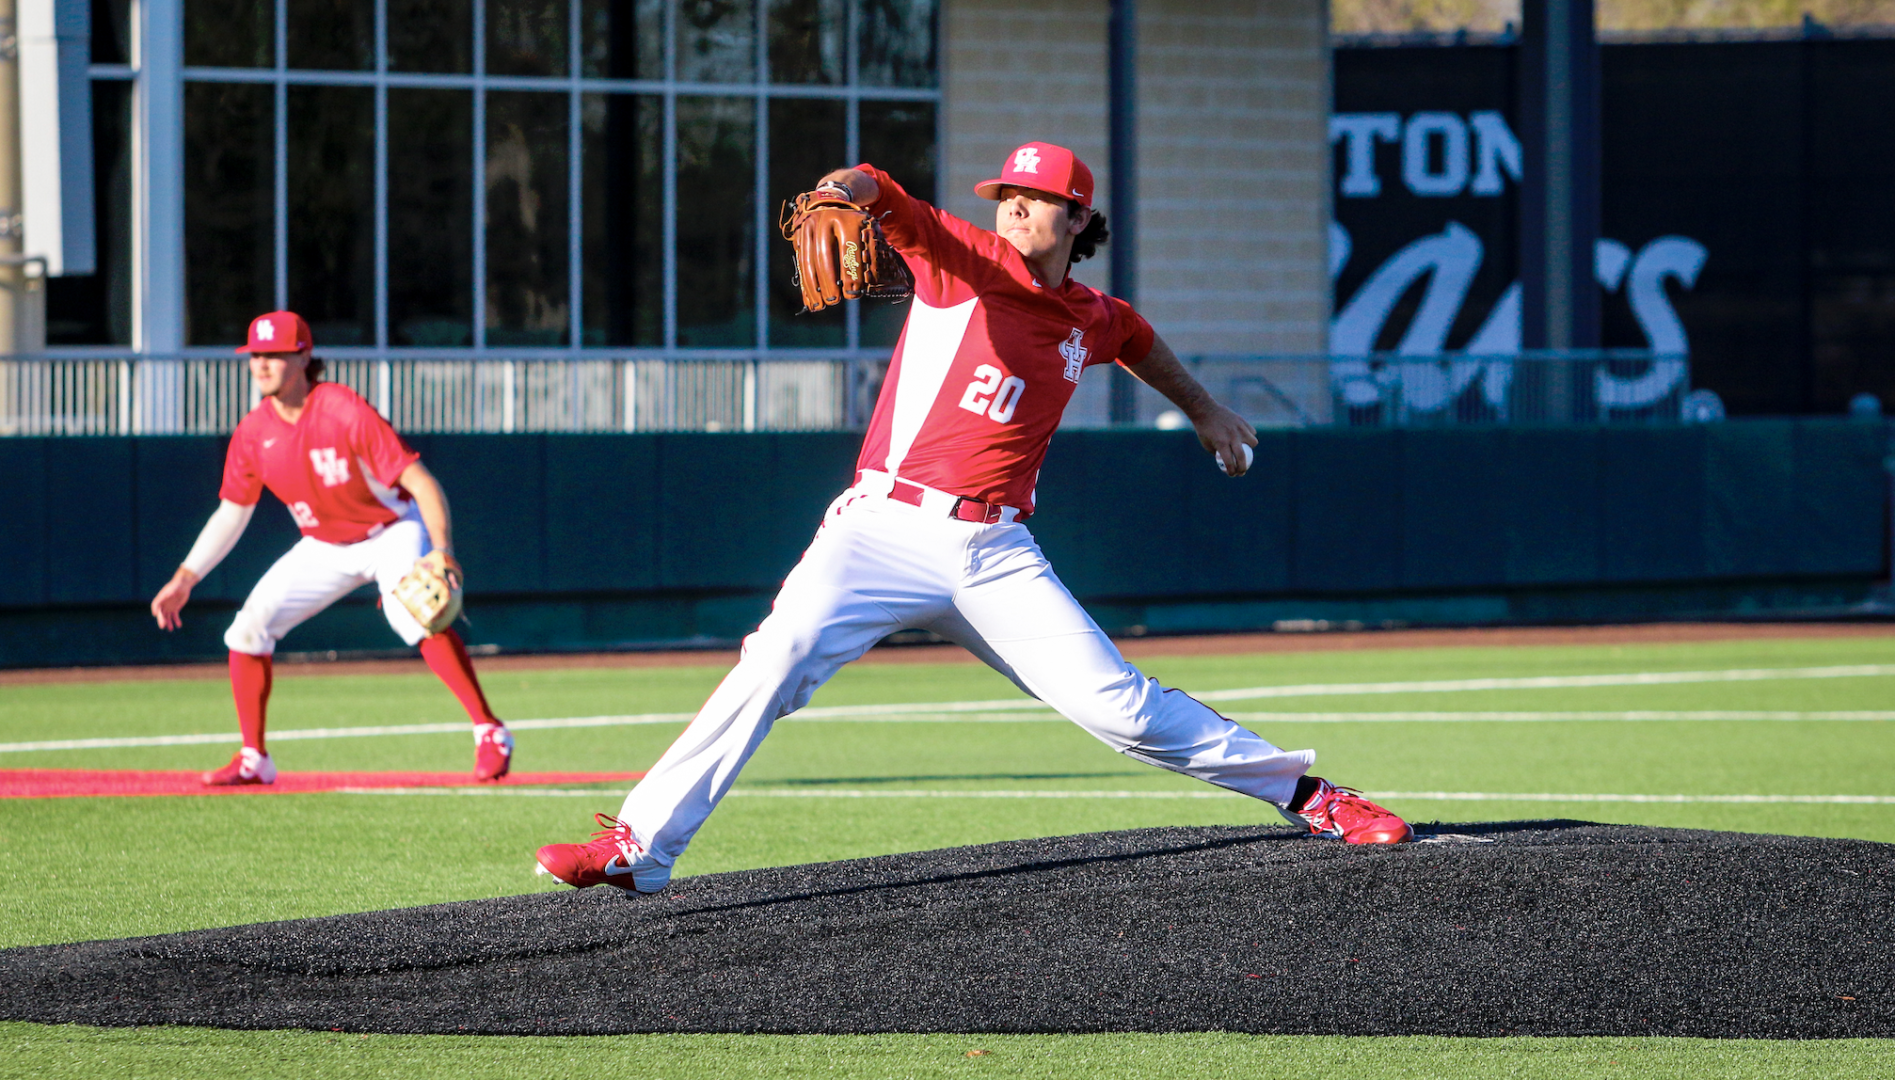 After a defensive and offensive cooldown midway through the Cougar vs Wildcat matchup, Houston gave up five runs in the seventh inning, giving Arizona a five-run lead it never surrendered. | File Photo/The Cougar